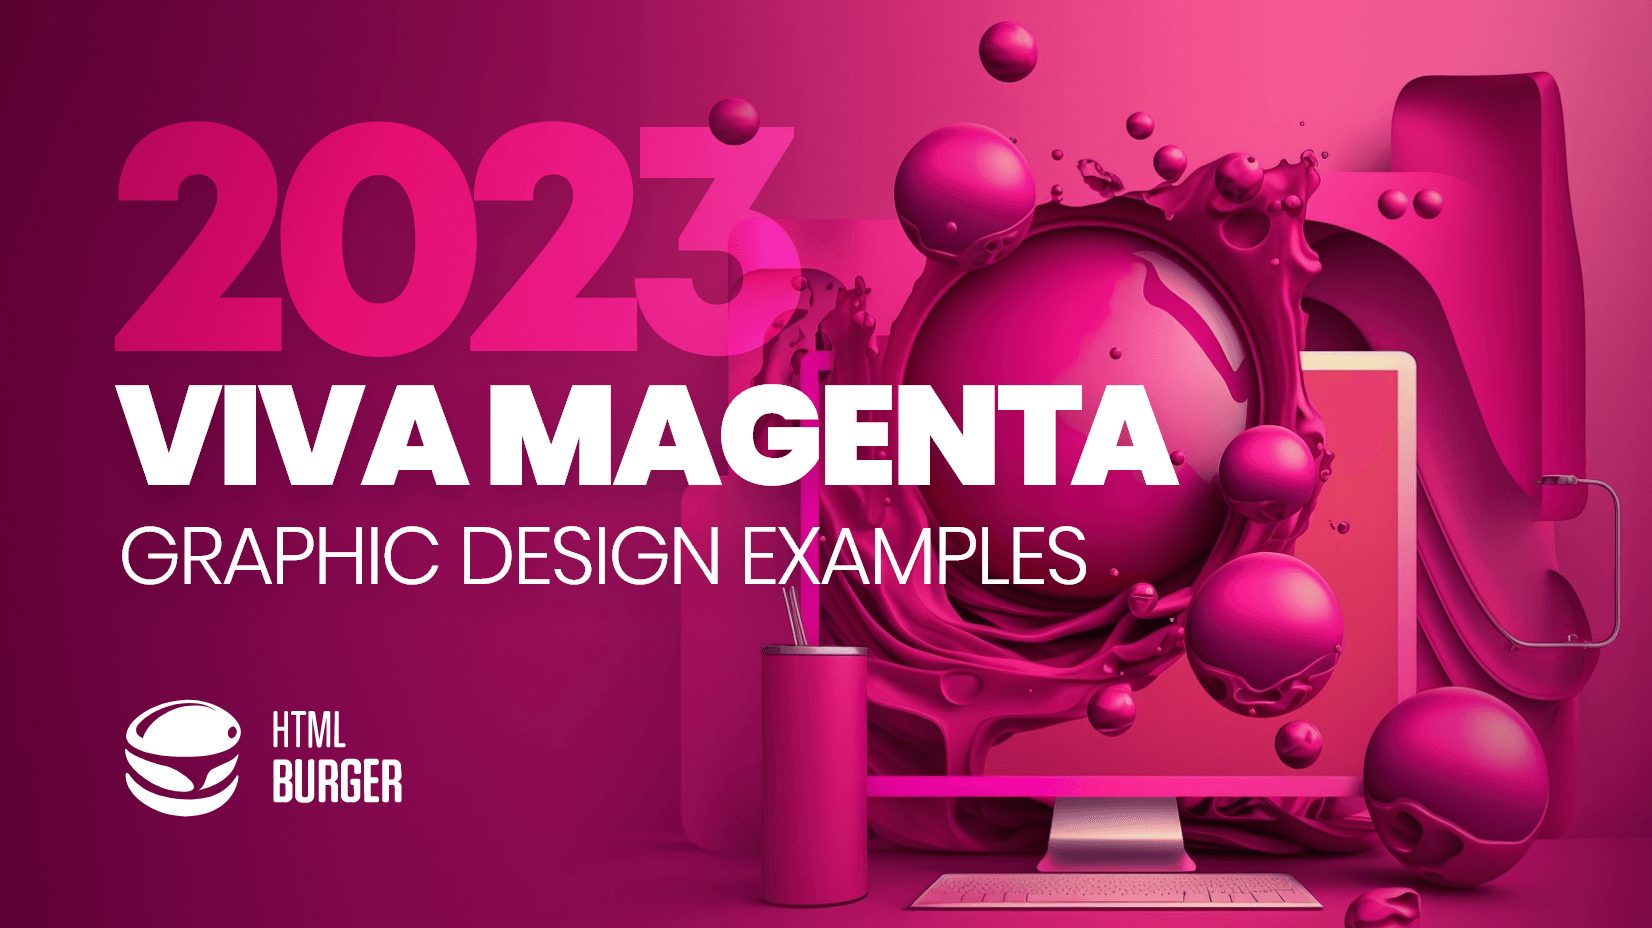 The Pantone Color of the Year 2023: Viva Magenta - Product +